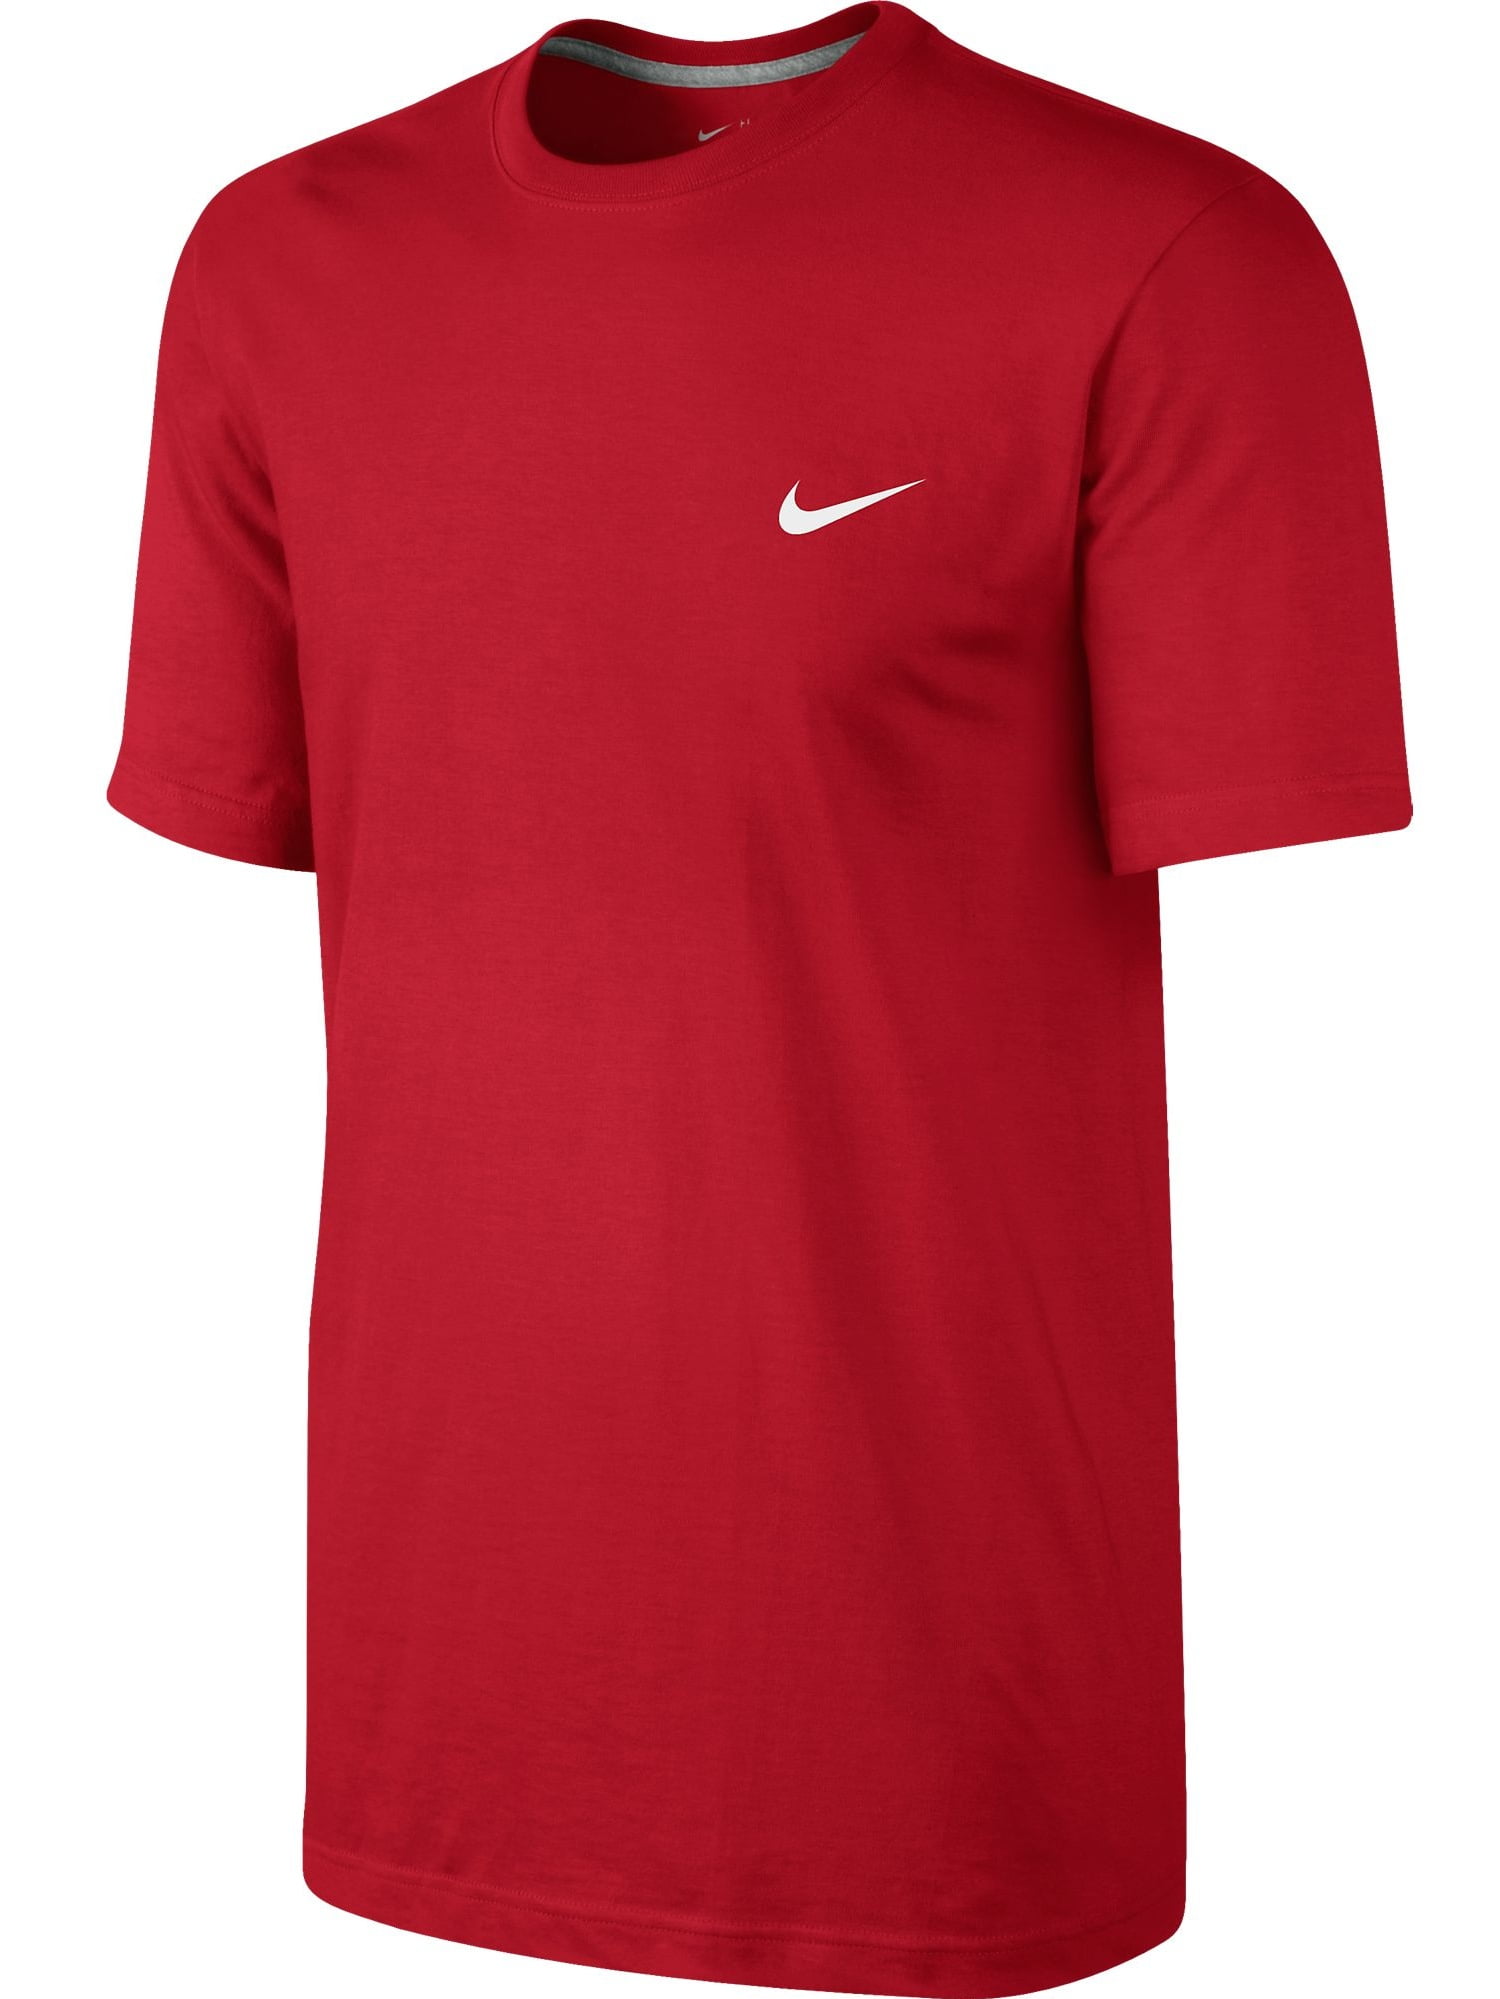 Nike - Nike Embroidered Swoosh Men's T-Shirt Athletic Red/White 707350 ...